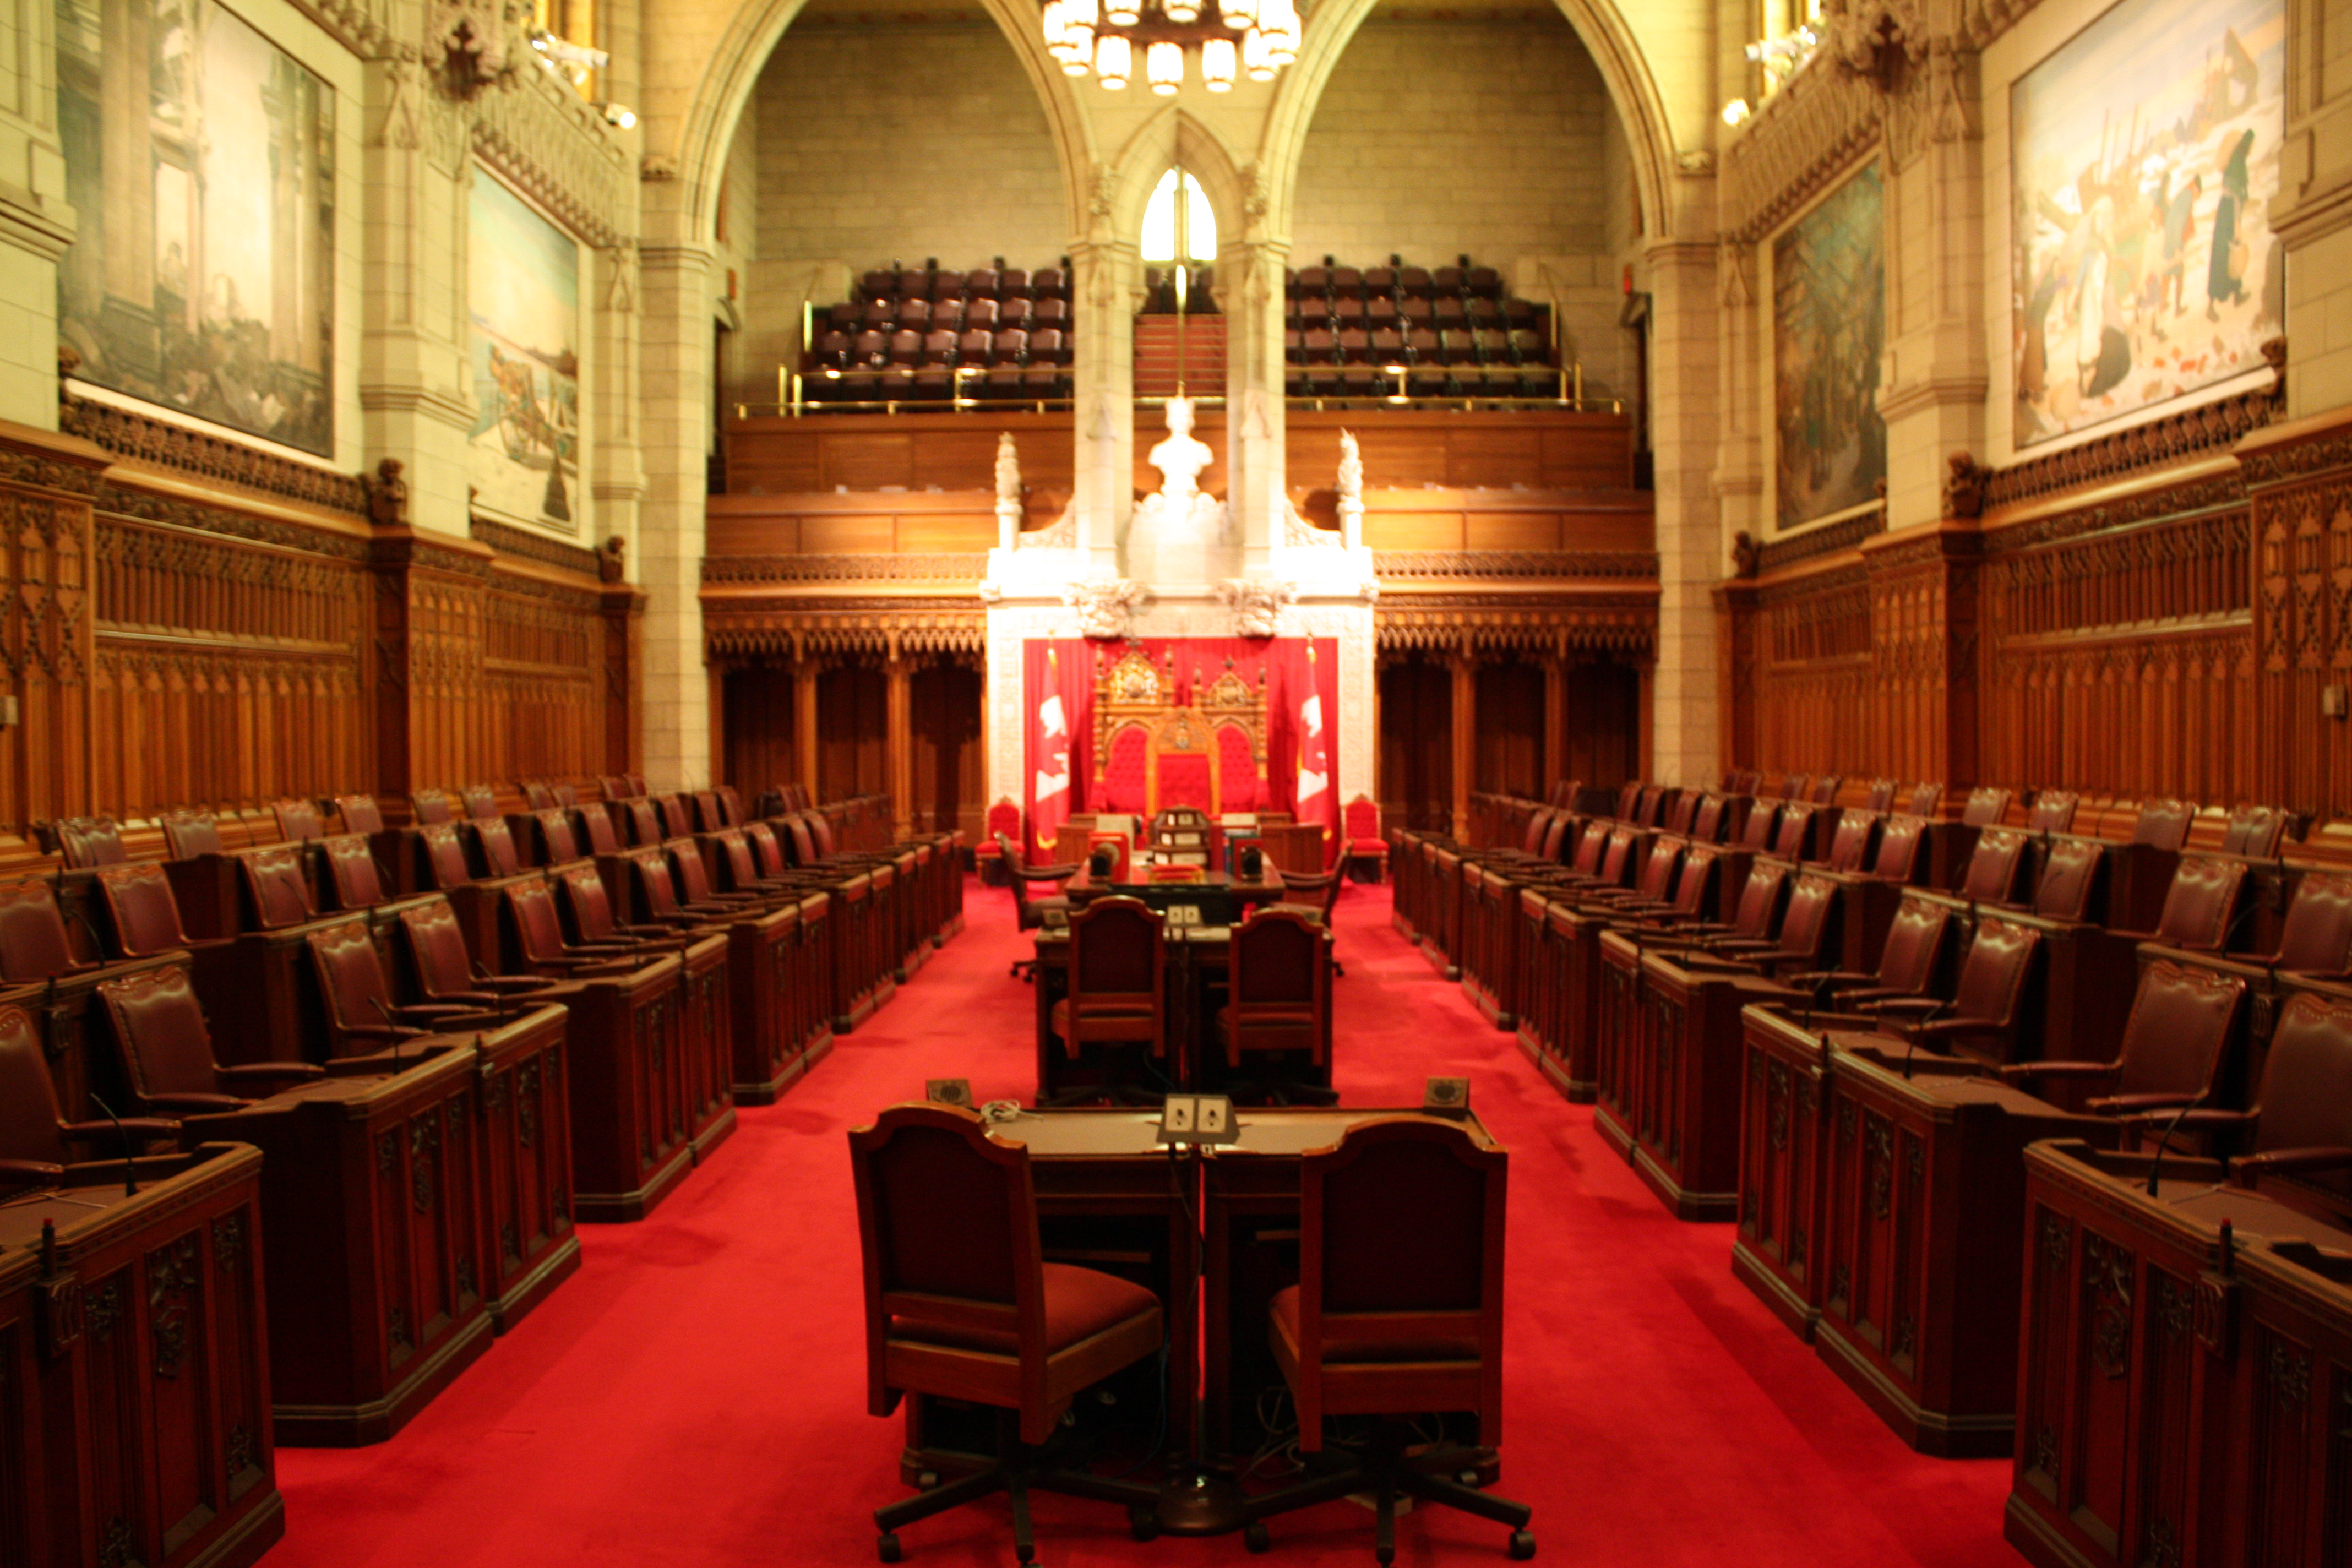 Parliamentary chamber with rows of chairs and desks, a red carpet, and a gallery.